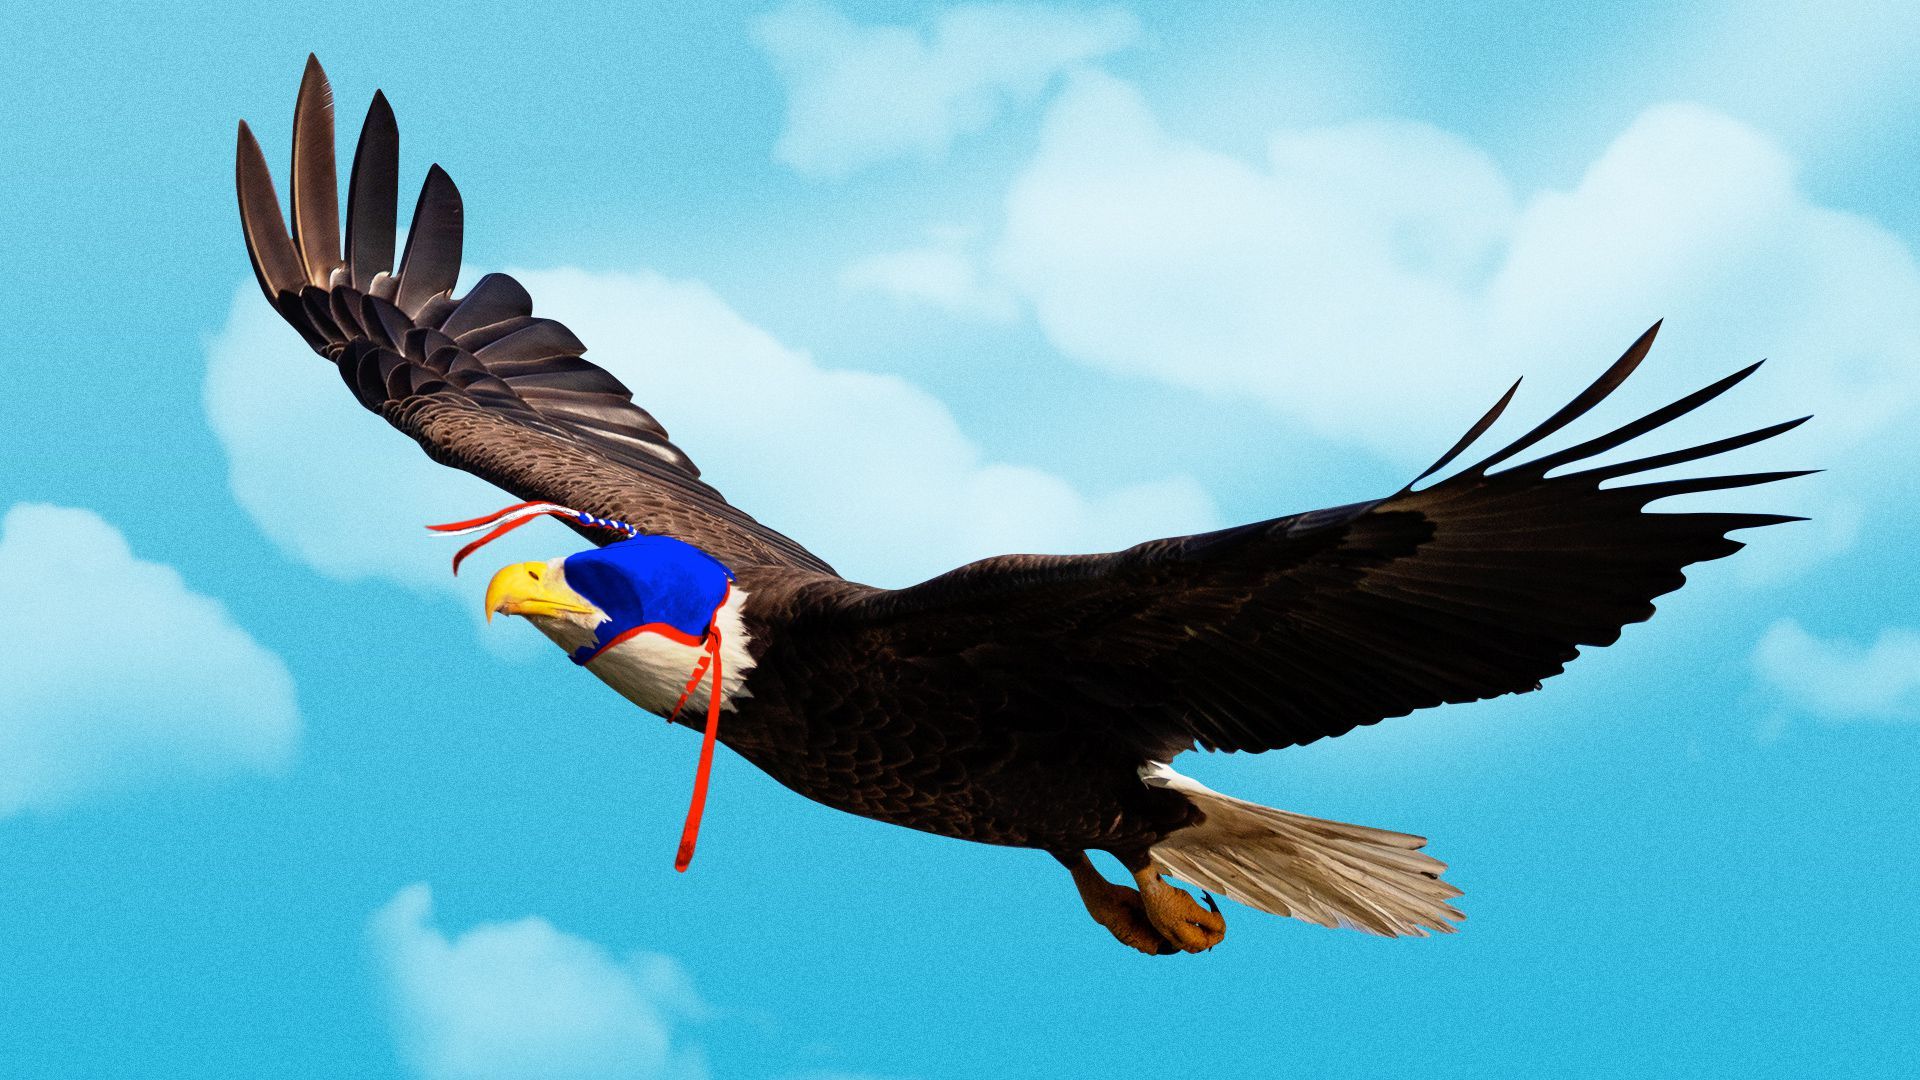 Illustration of an eagle flying with a hood on that has an American themed pattern on it.